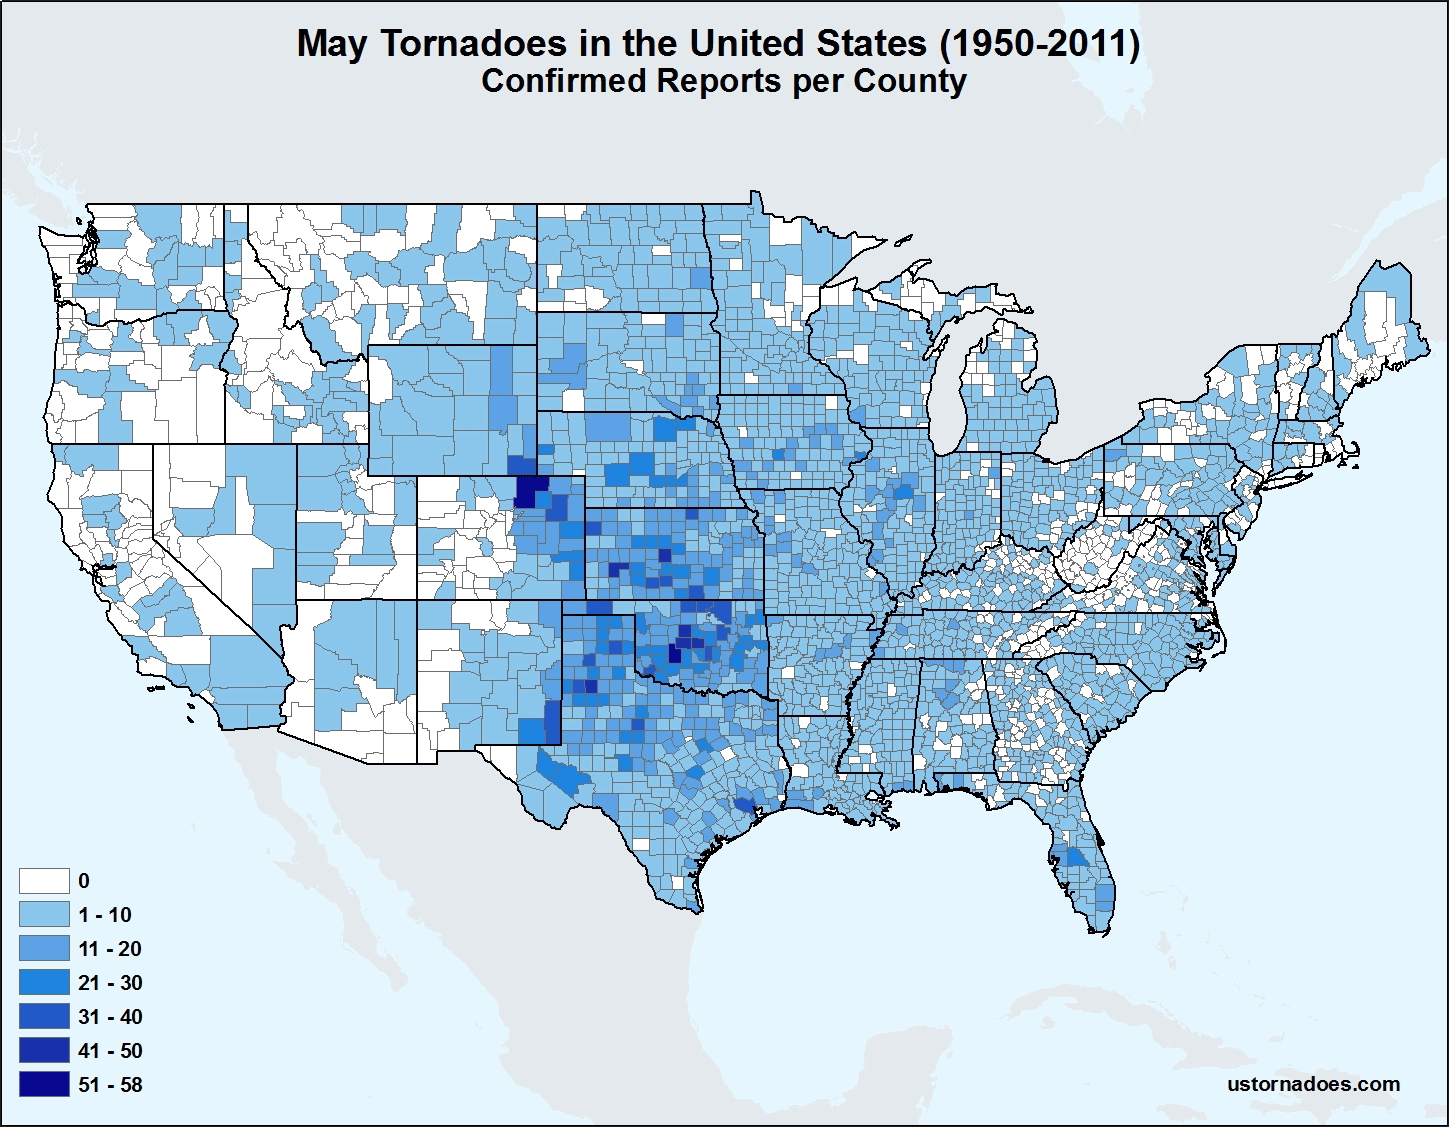 May Tornadoes in the United States, colored by county, courtesy of USTornadoes.Com